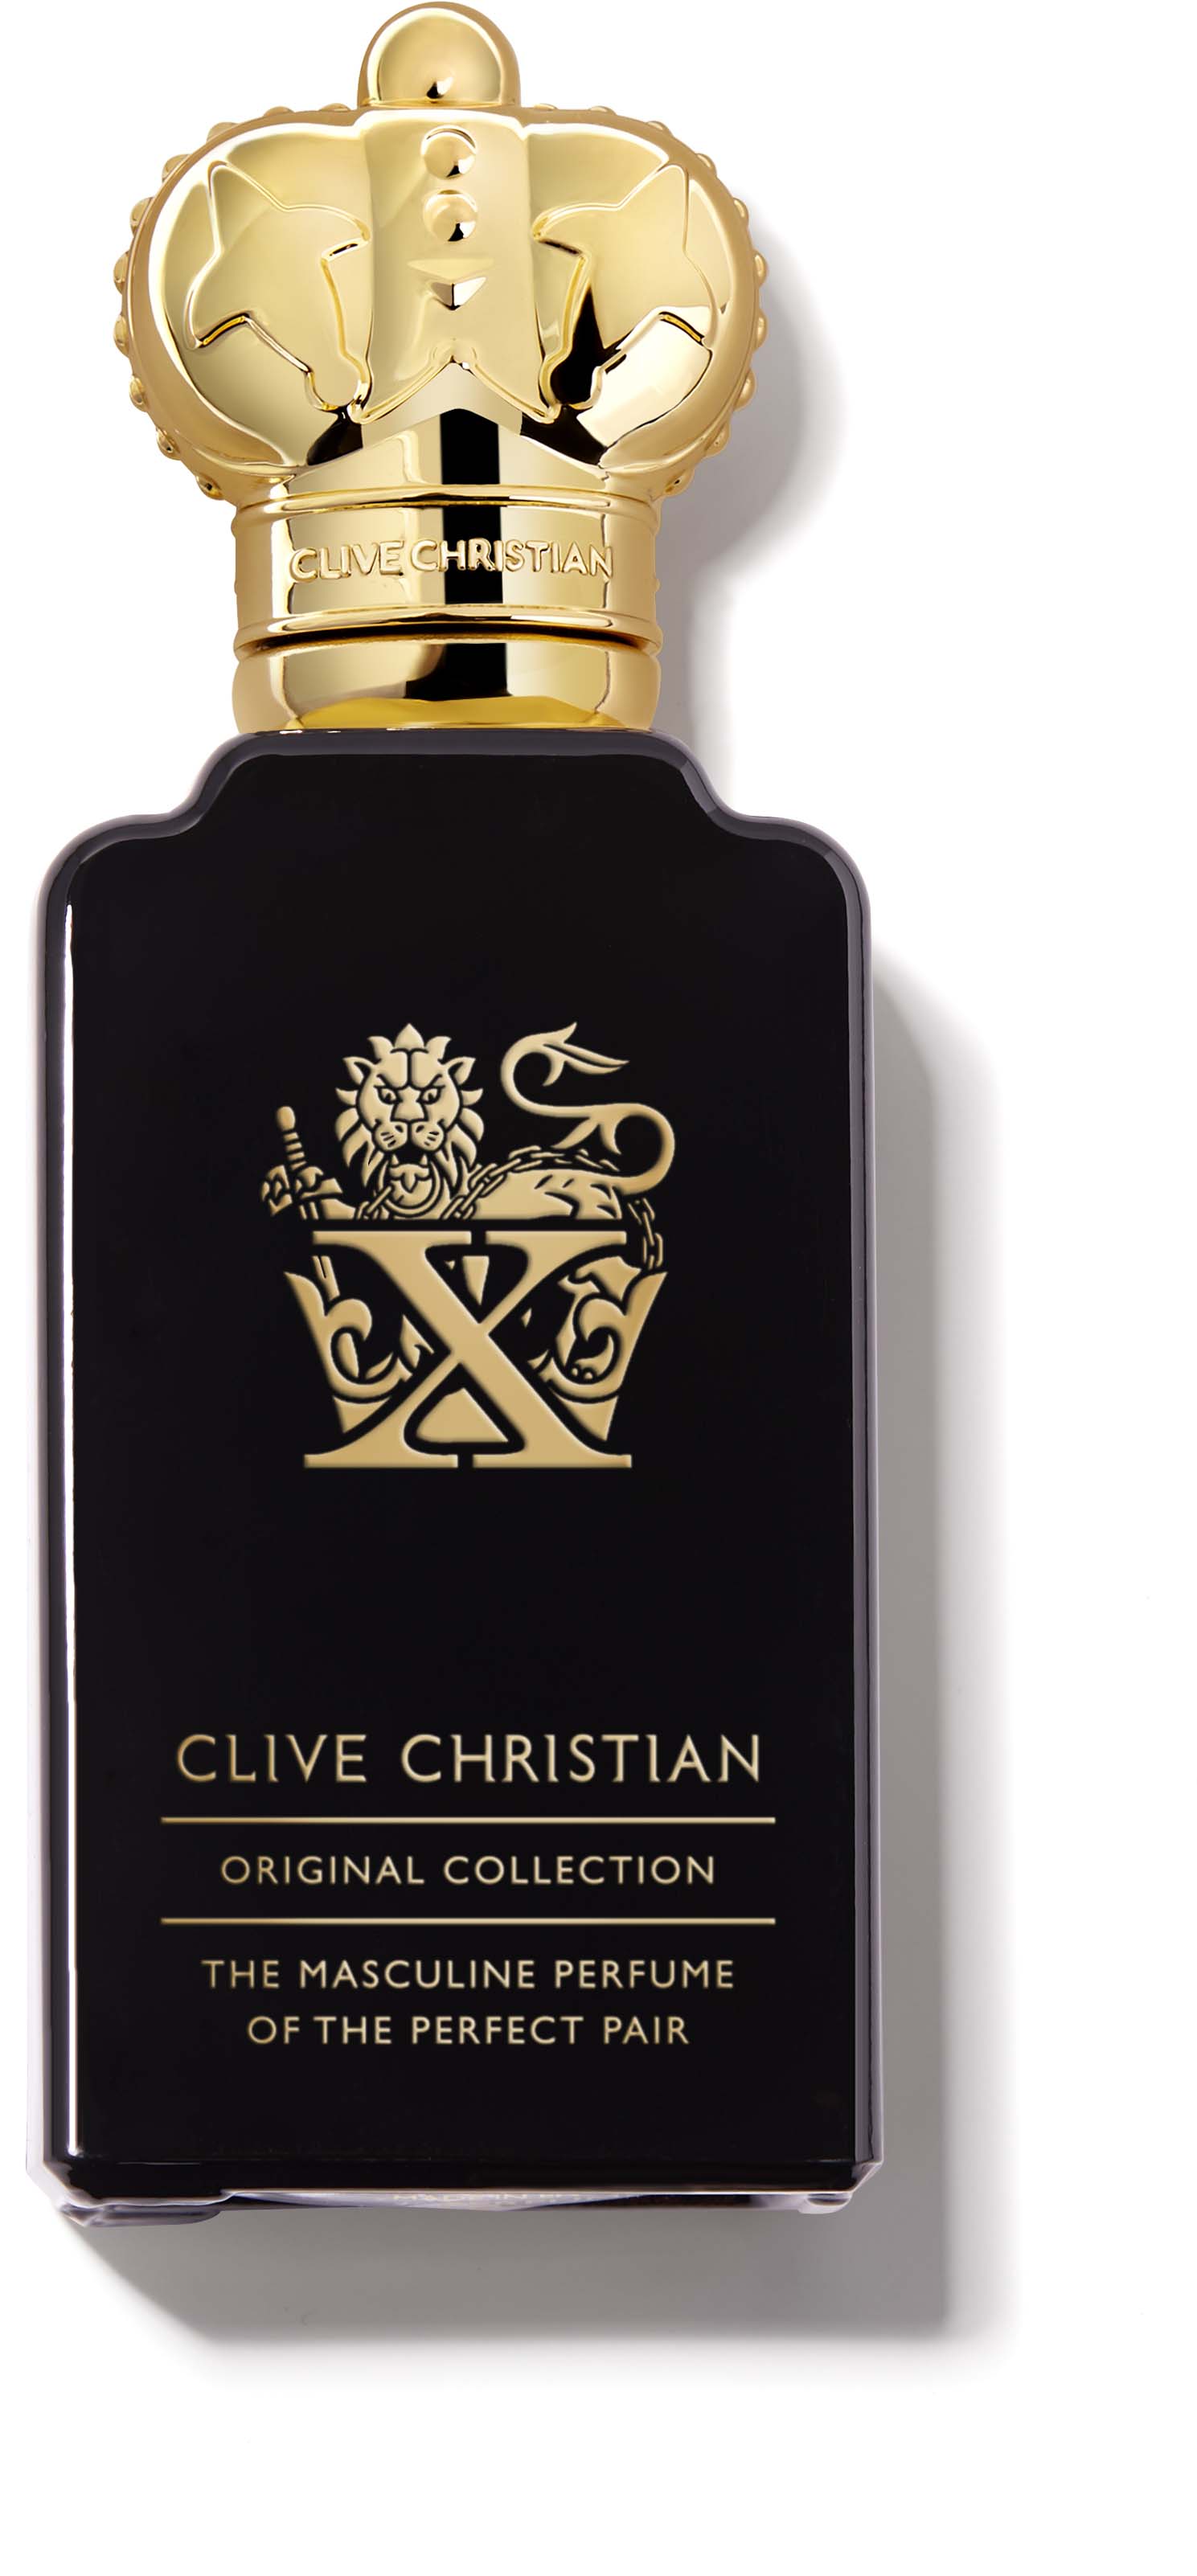 clive christian original collection - x the masculine perfume of the perfect pair